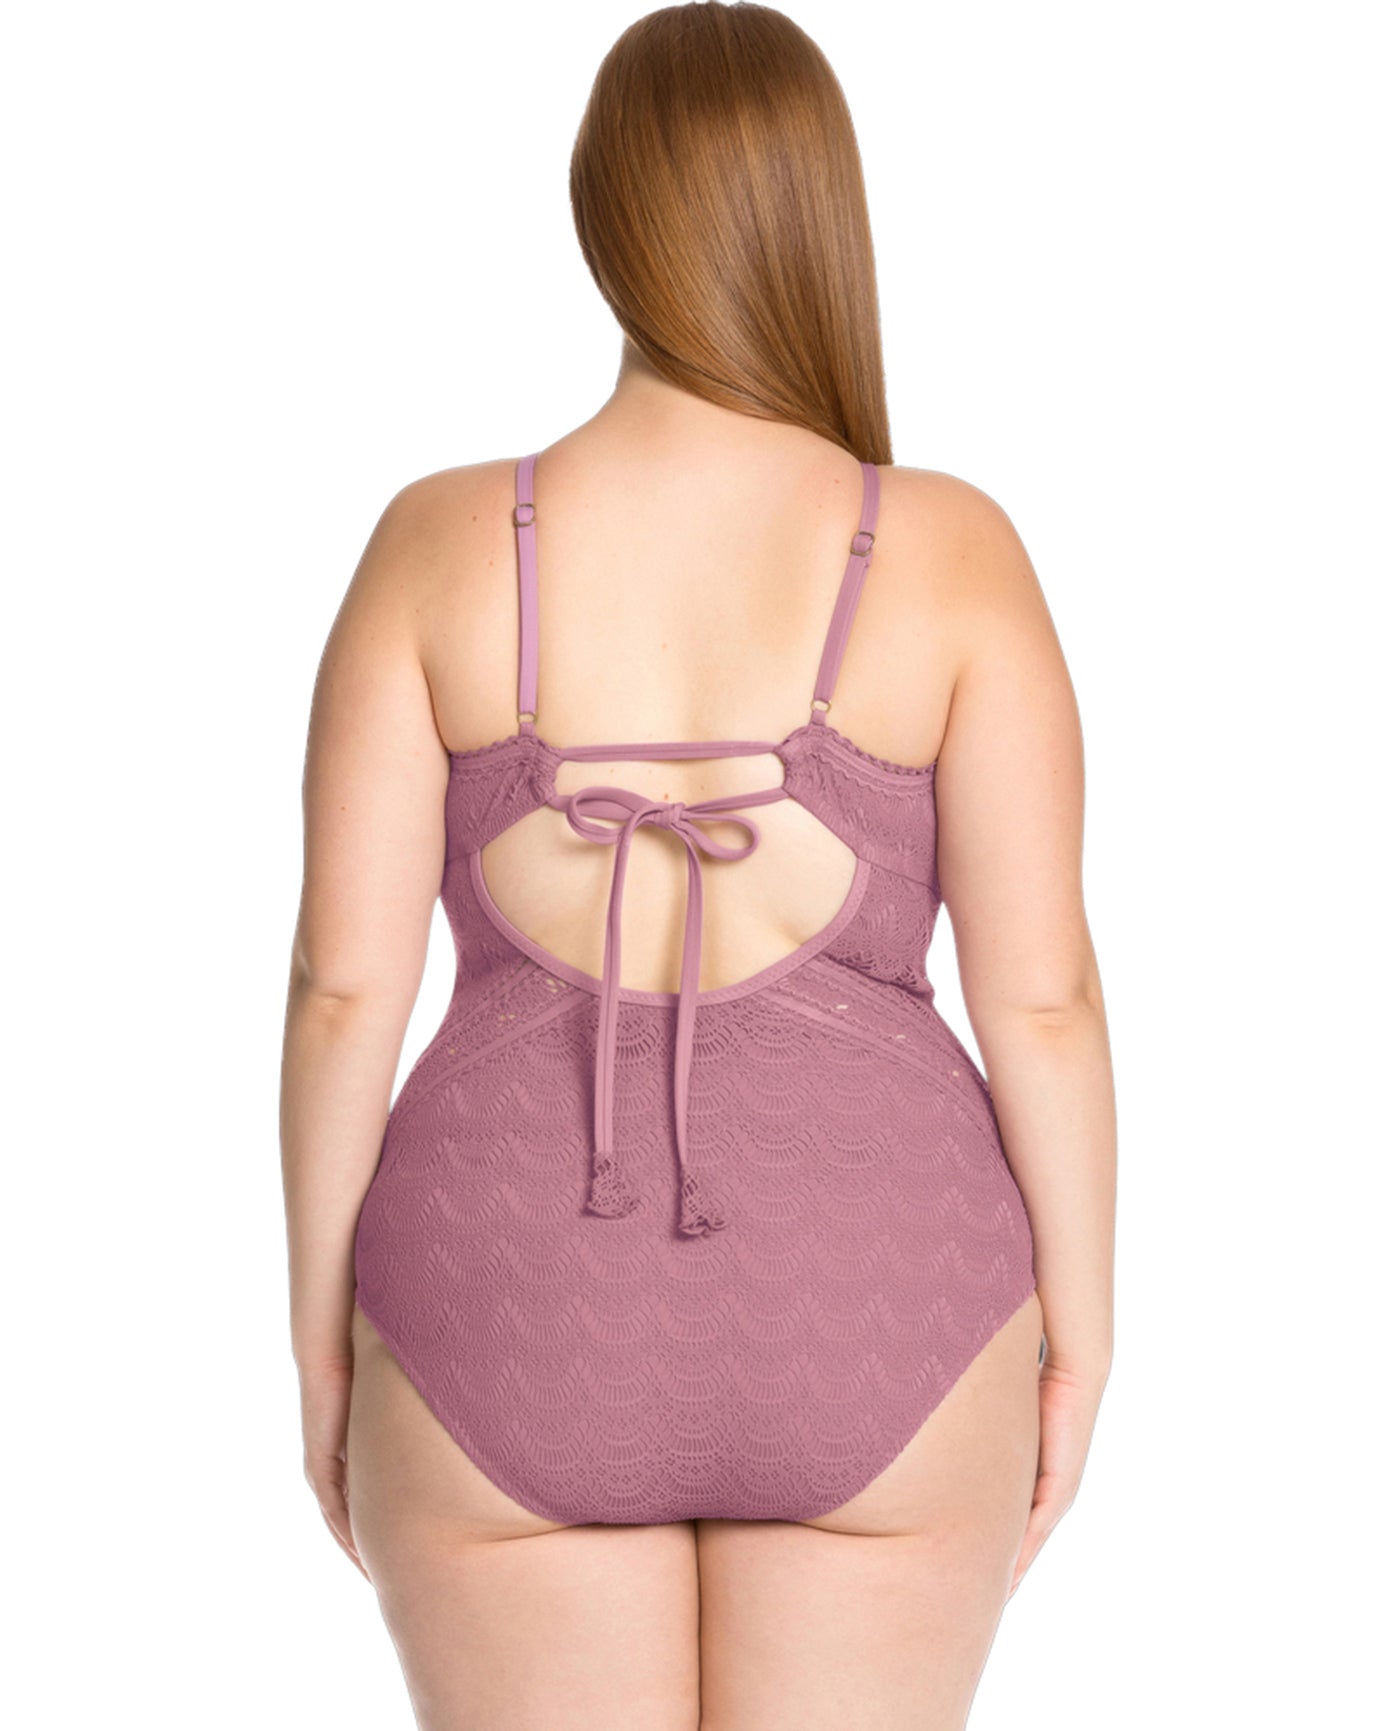 Back View Of Becca ETC by Rebecca Virtue Color Play Lace High Neck Plus Size One Piece Swimsuit | BEC Color Play Mauve